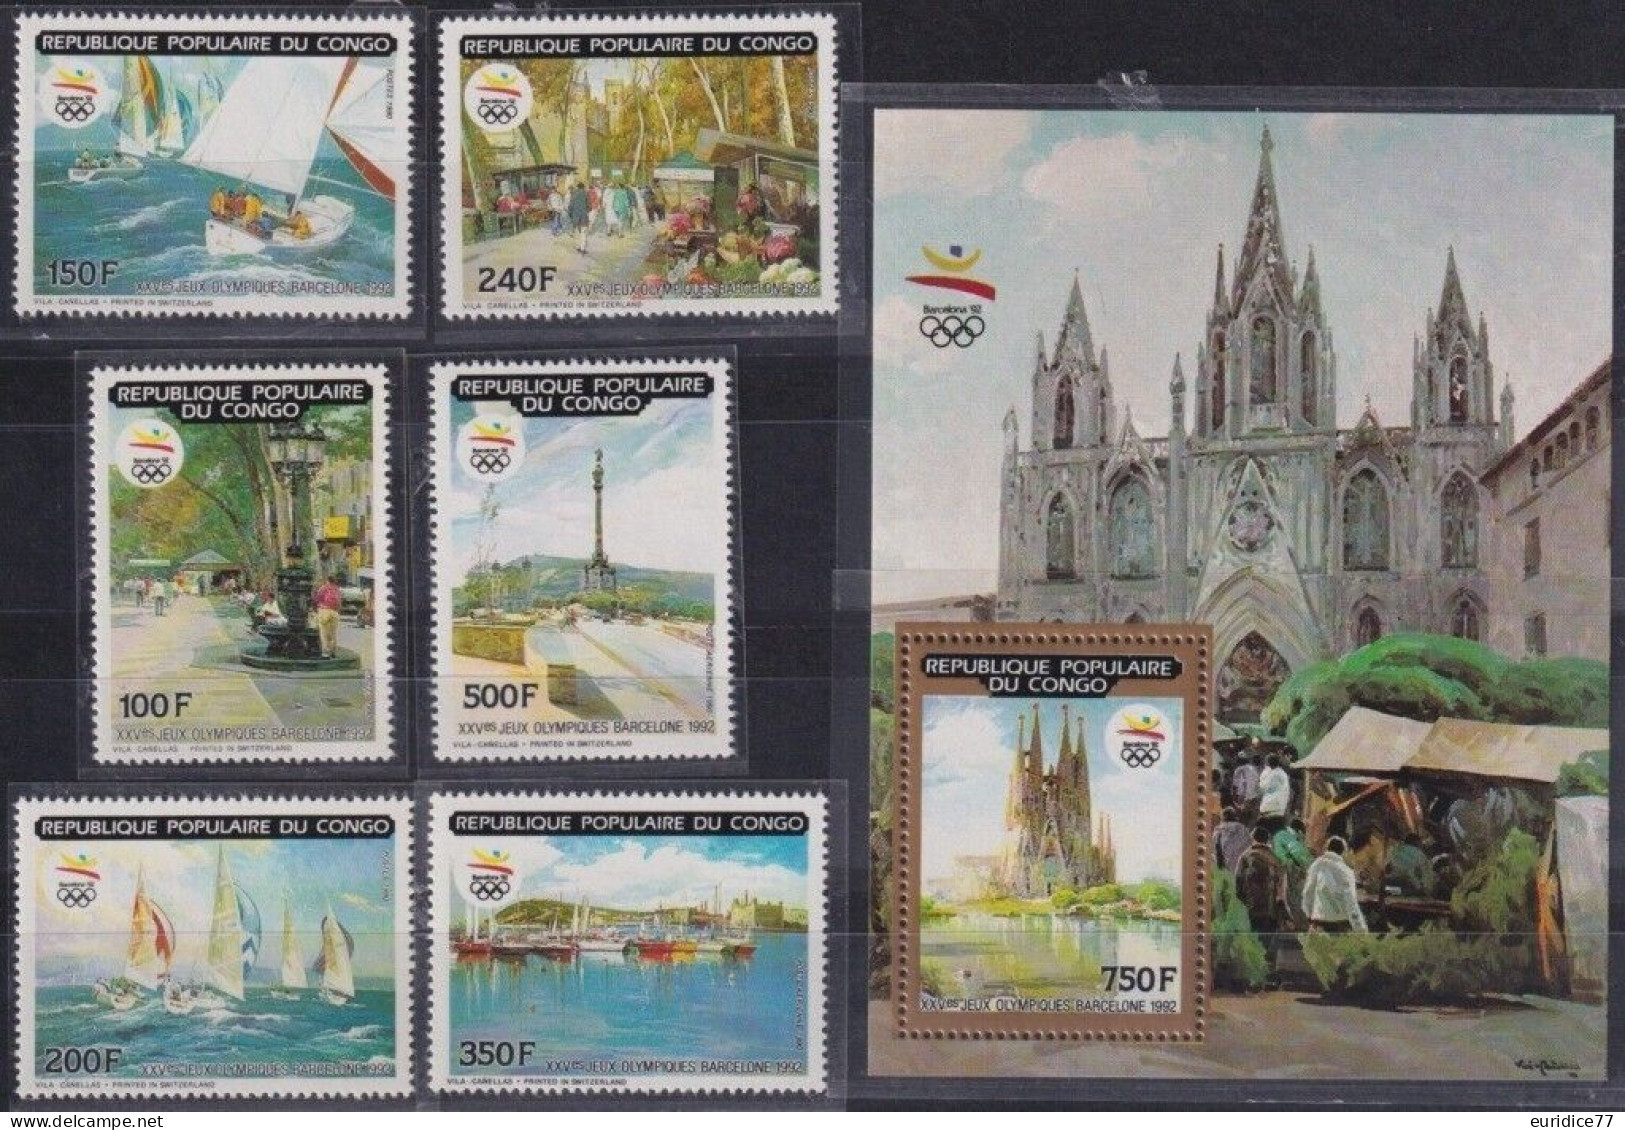 Congo Rep. Popular 1990 - Olympic Games Barcelona 92 Mnh** - Sommer 1992: Barcelone